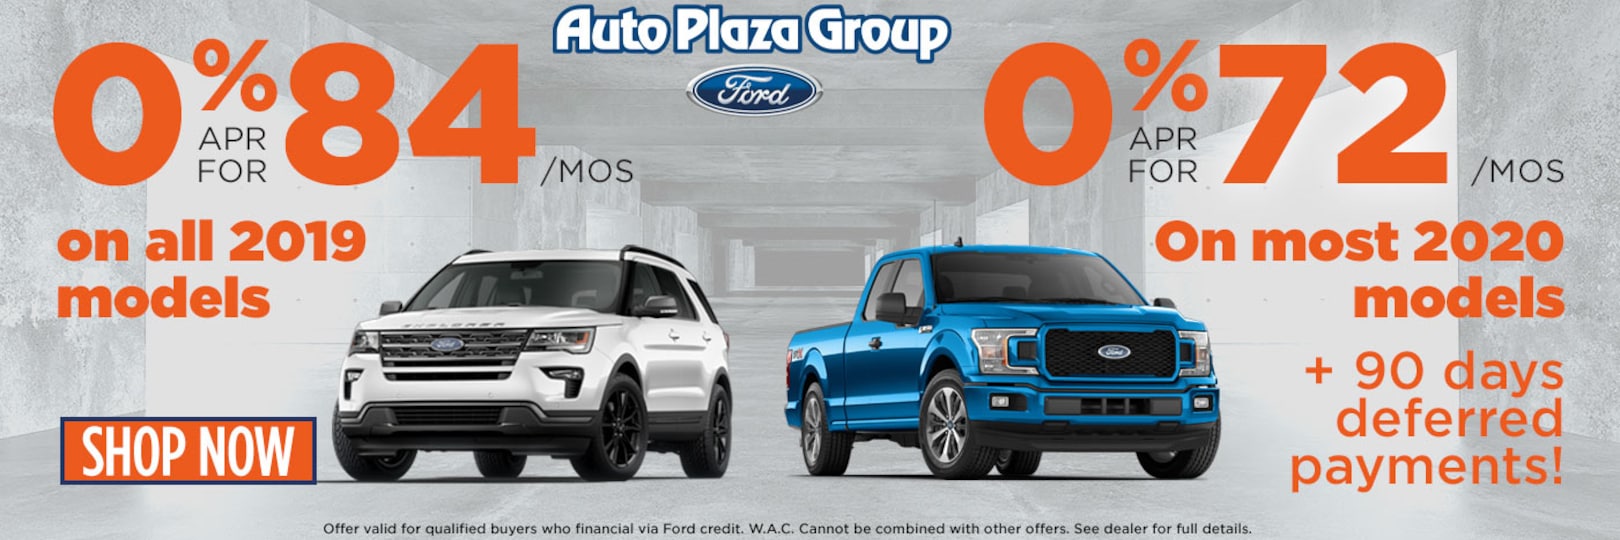 Auto Plaza Ford Inc. New and Used Ford Dealership in De